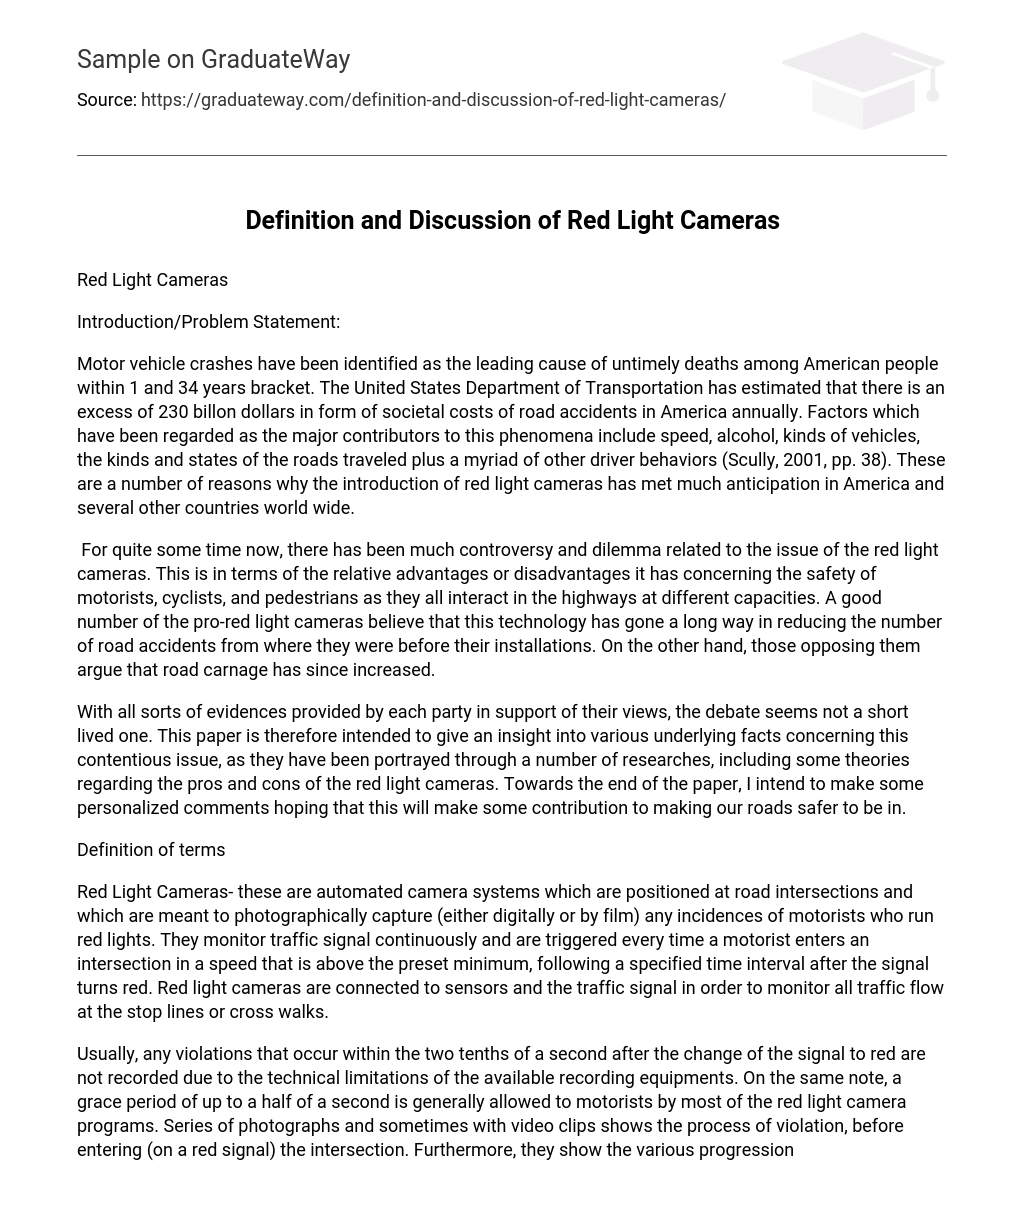 Definition and Discussion of Red Light Cameras